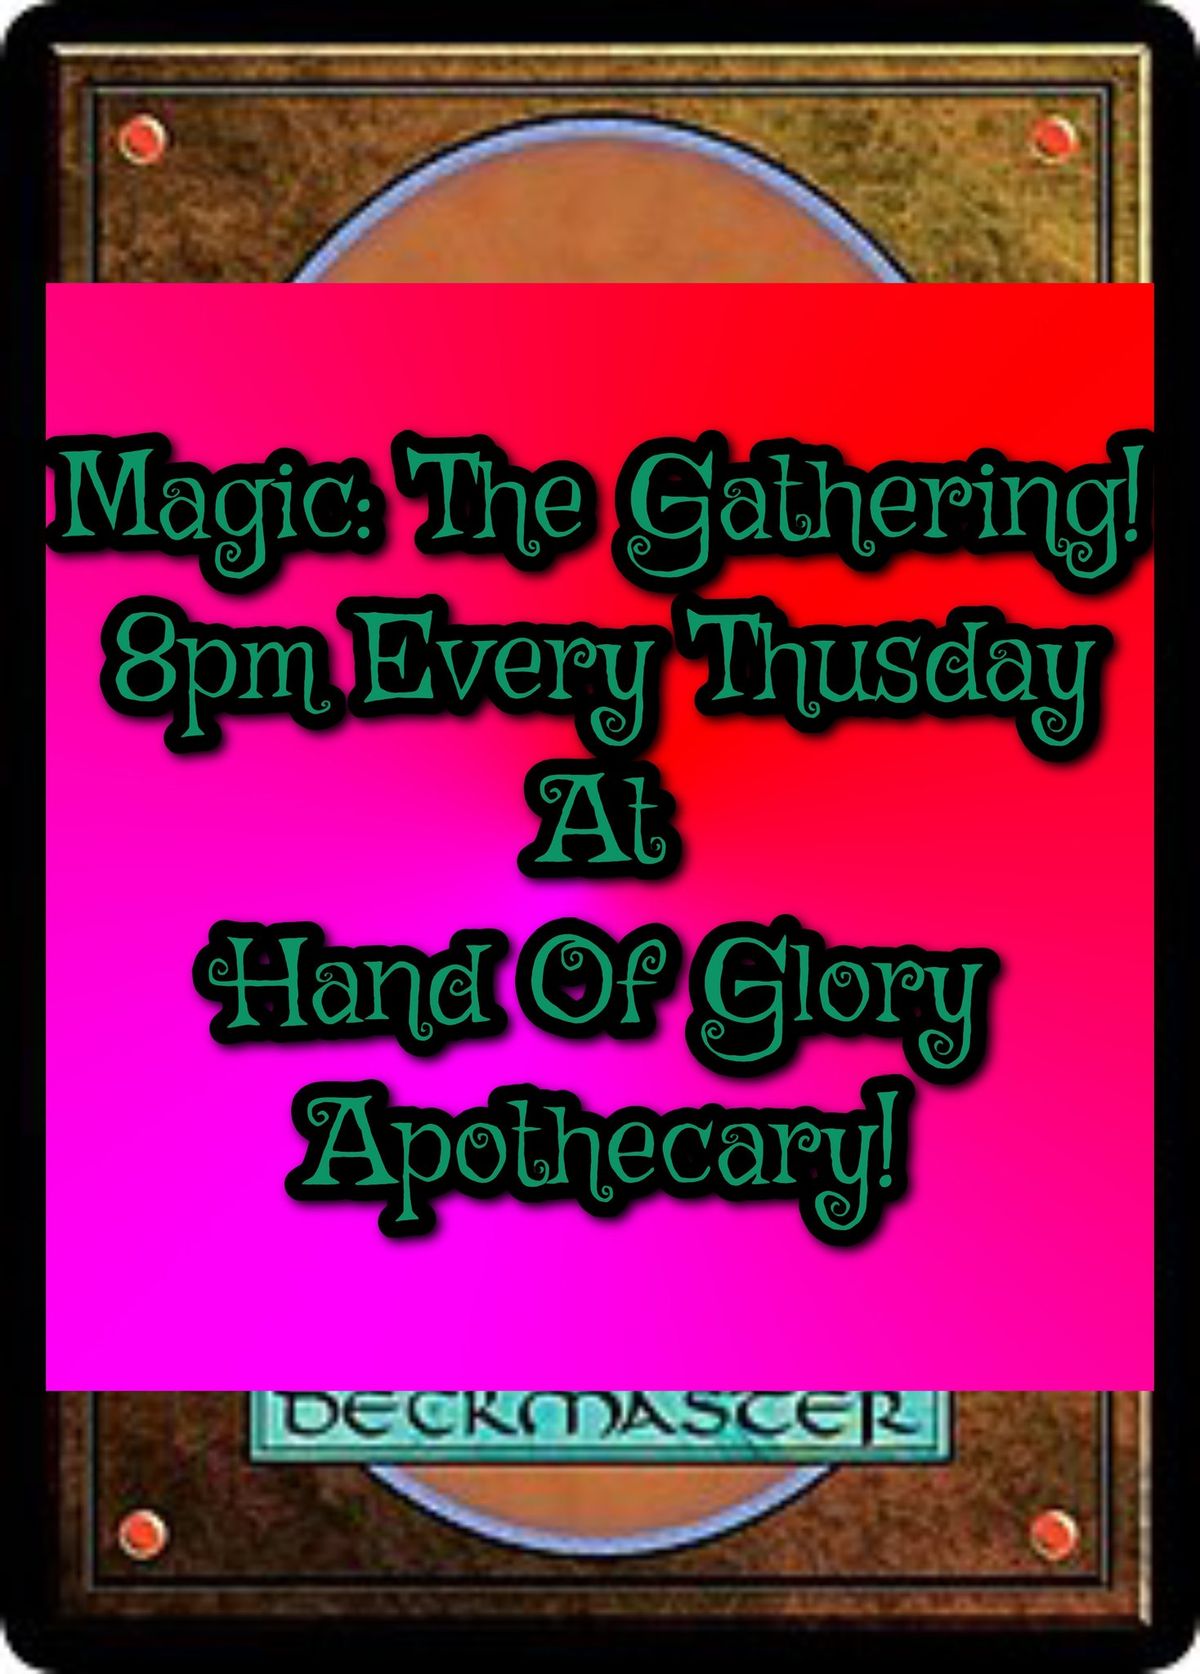 MAGIC THE GATHERING AFTER DARK!